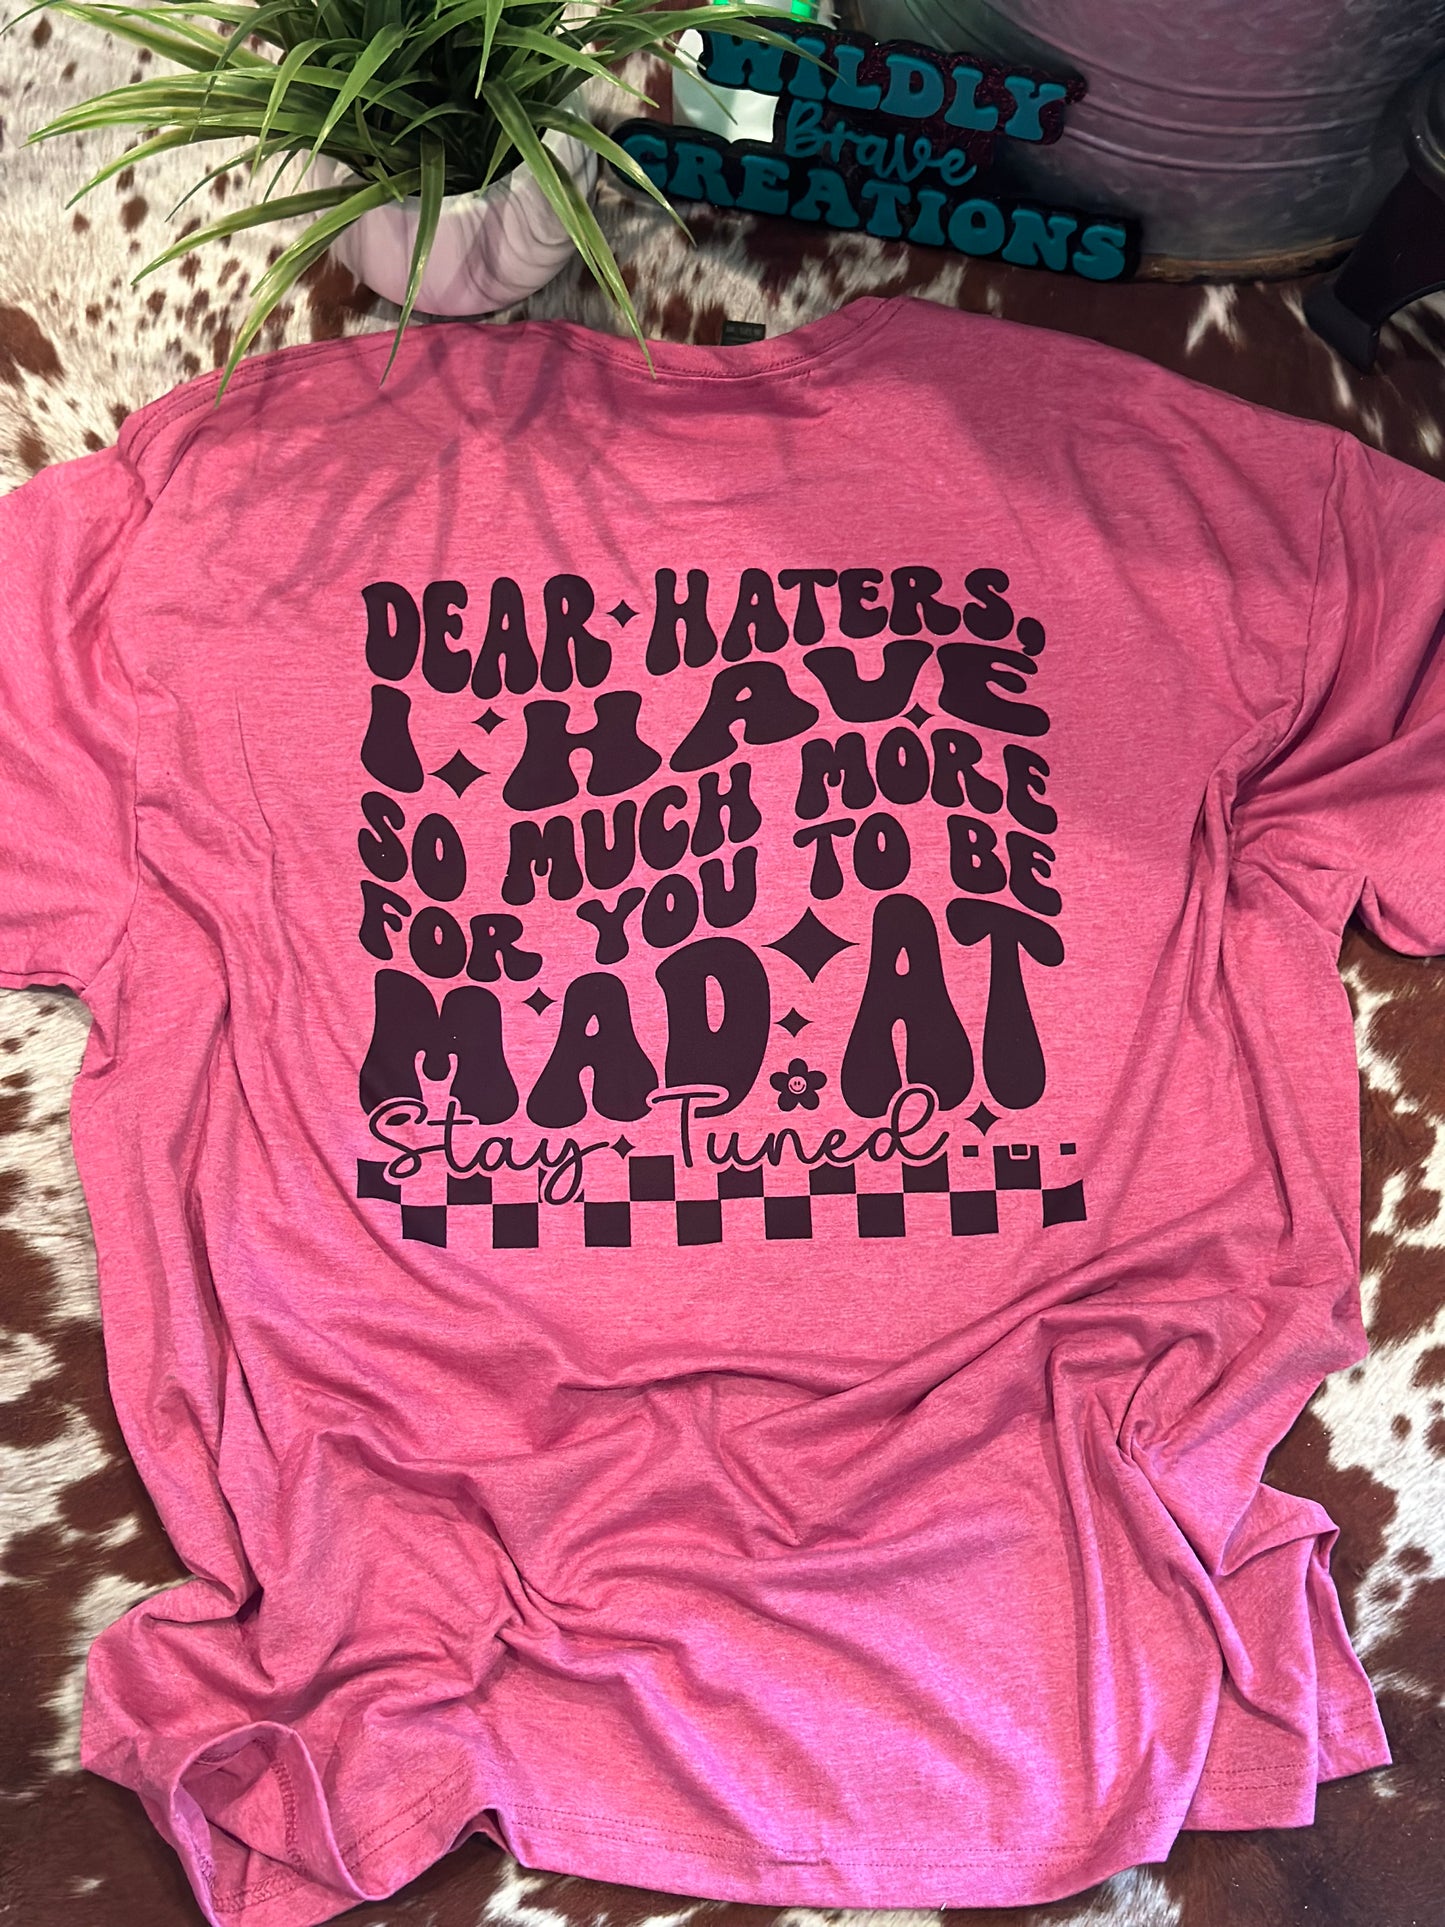 Haters Hate T-shirt